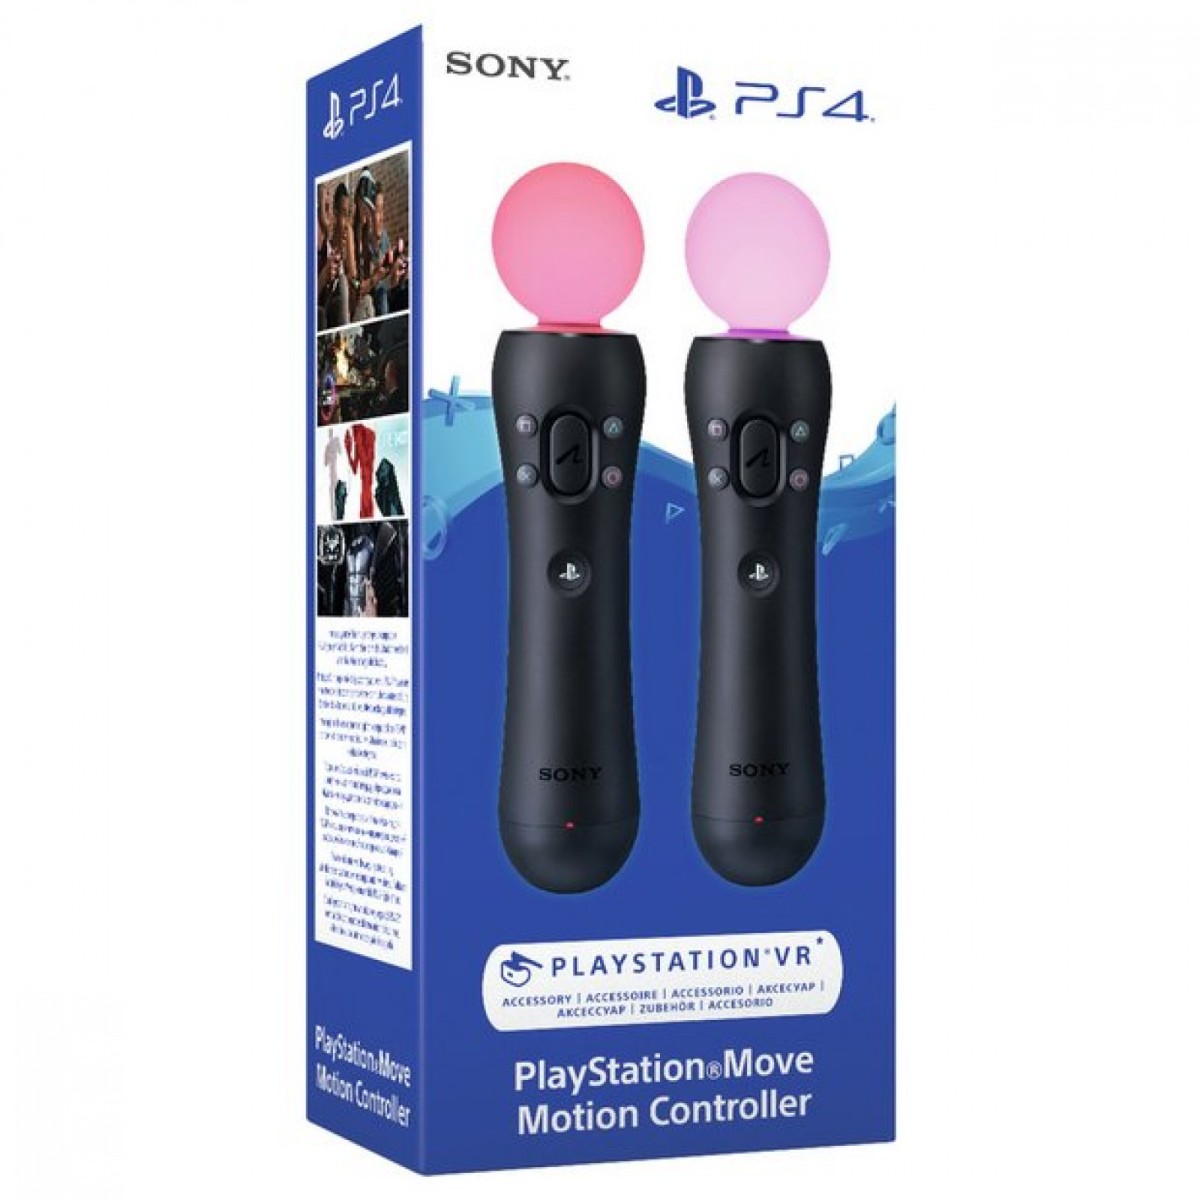 playstation move motion controller games